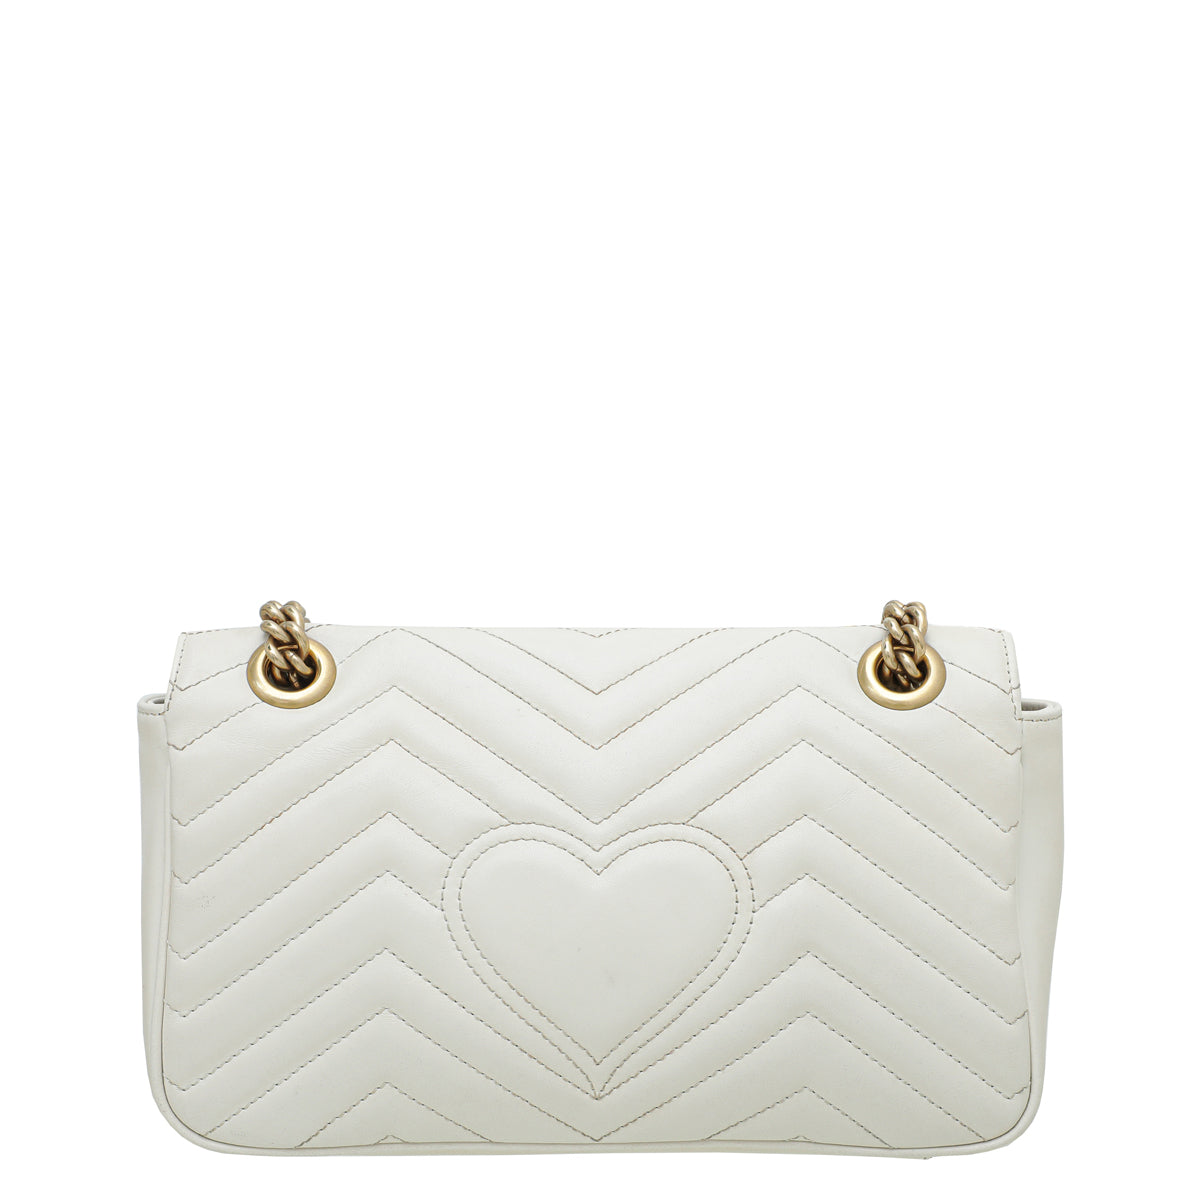 Gucci White GG Marmont Small Flap Bag